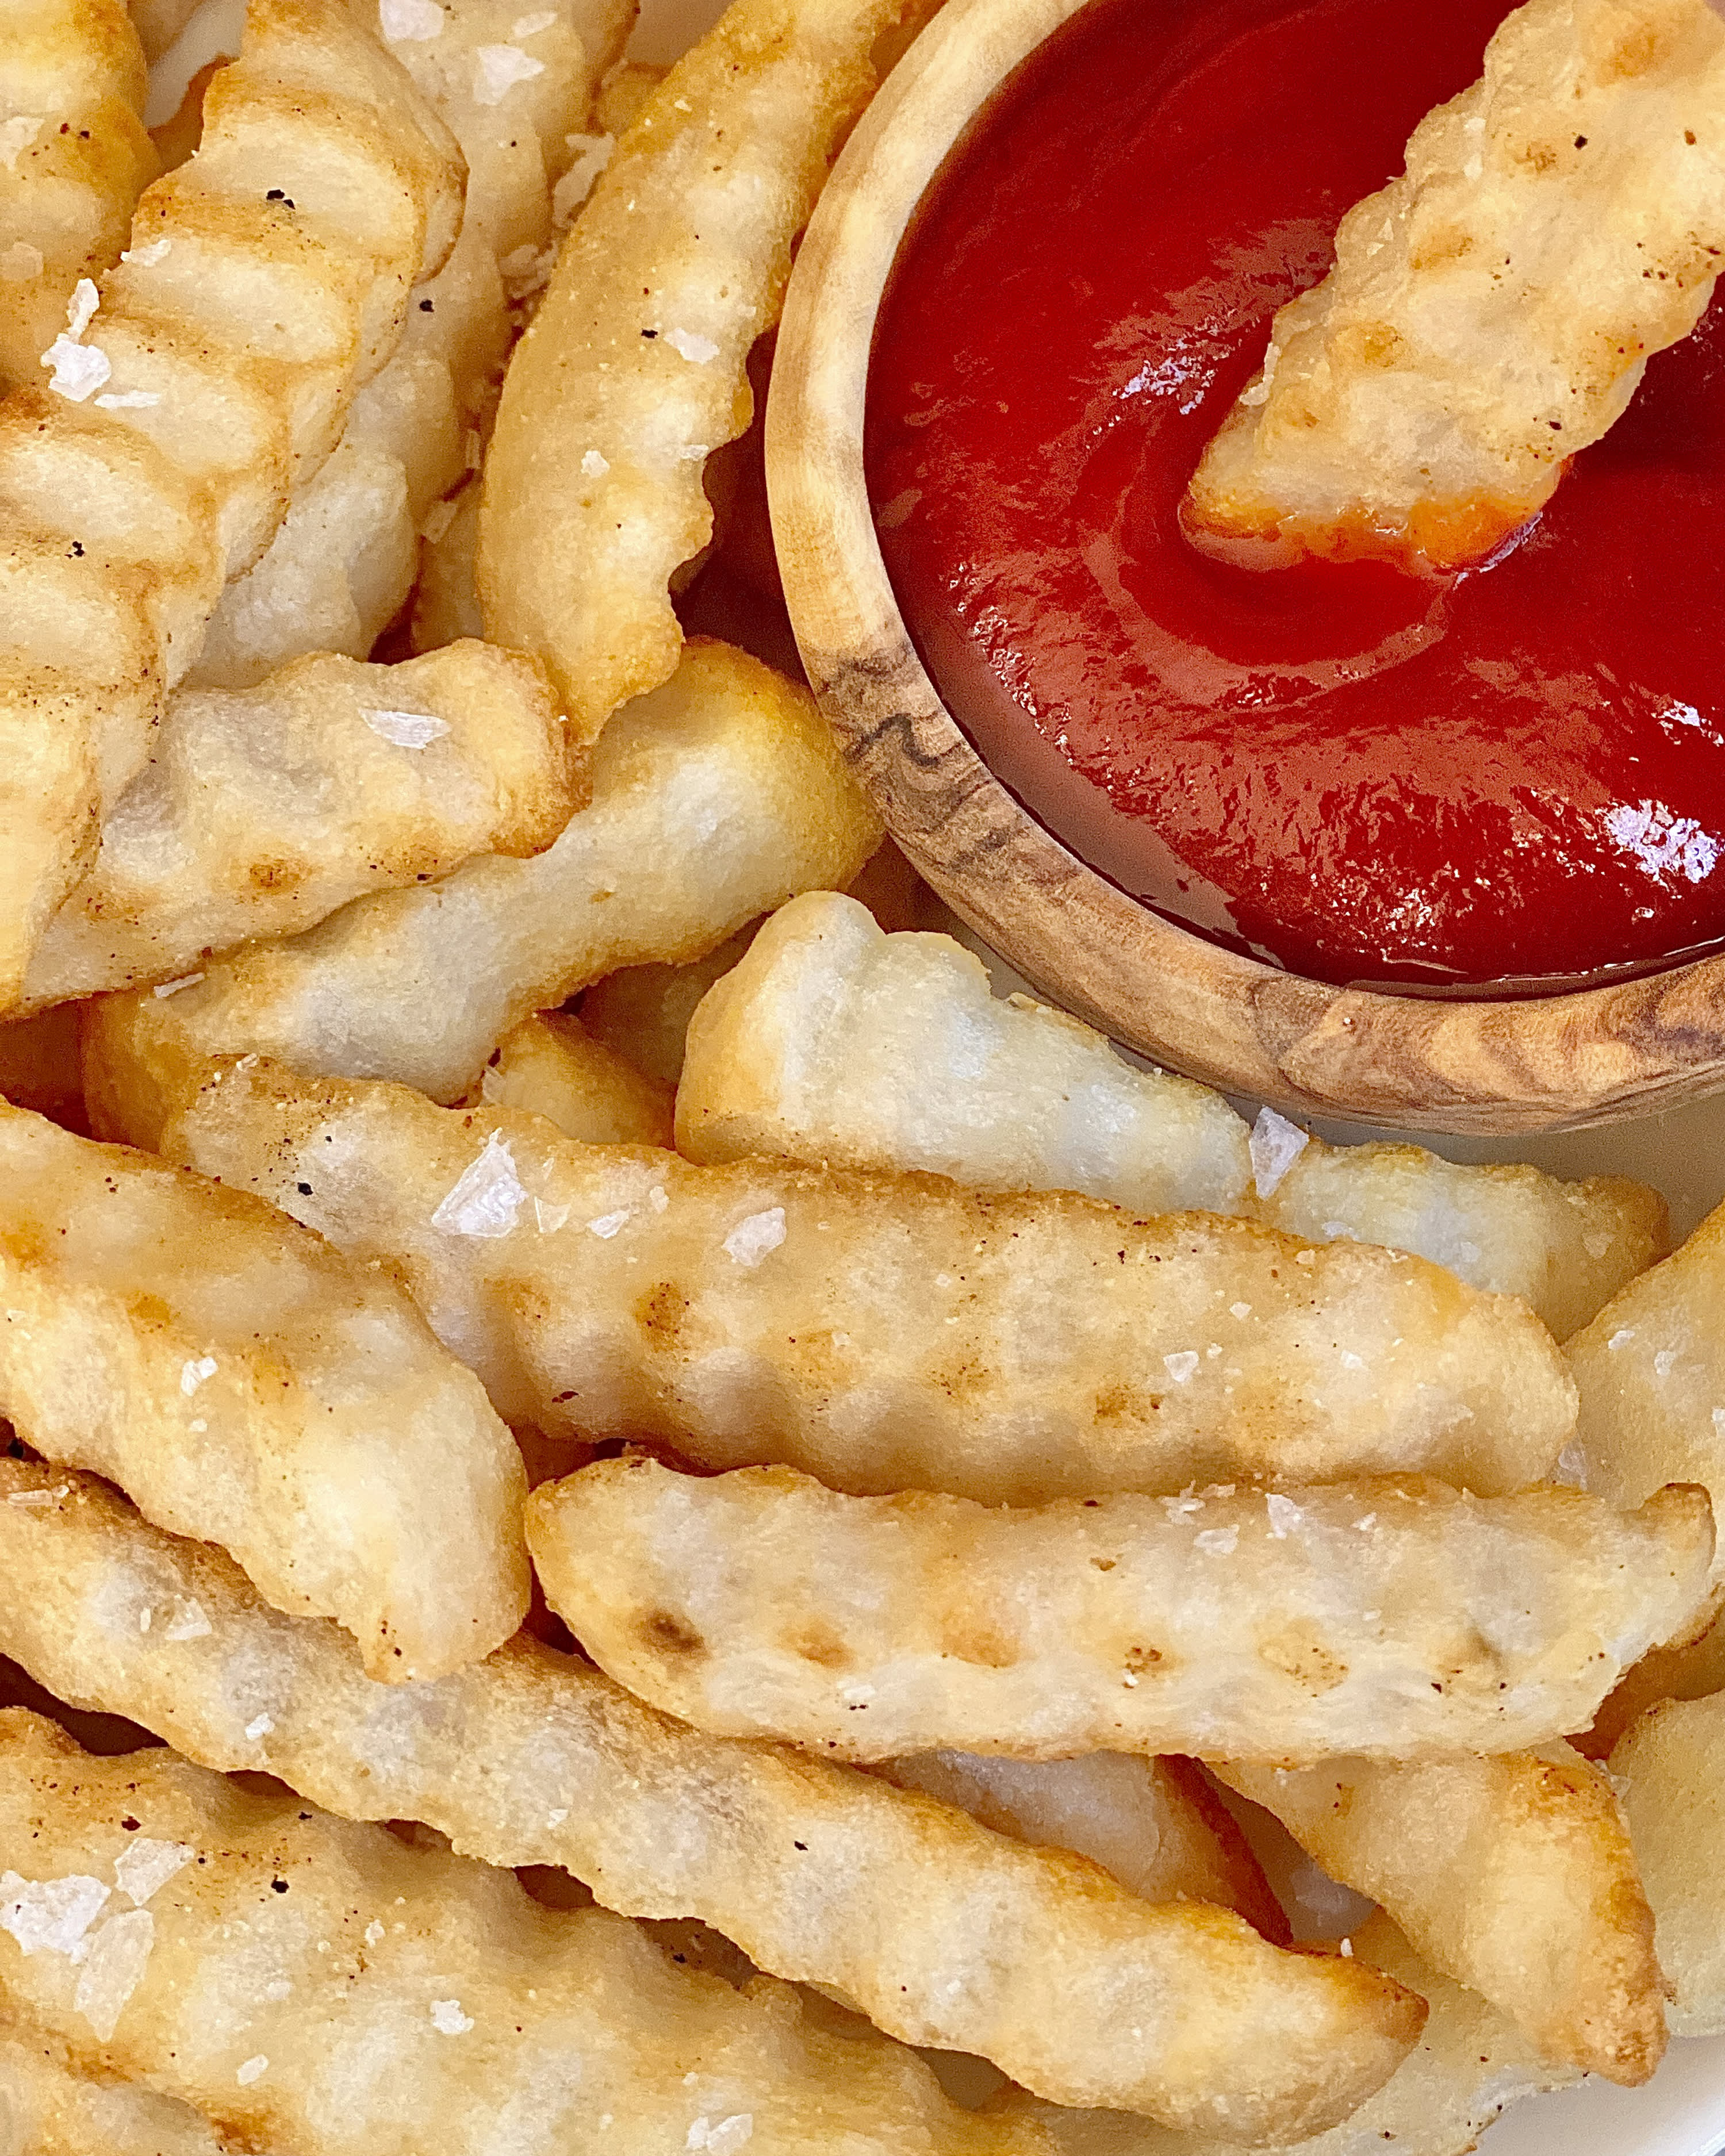 The Best Frozen French Fries, According to a Taste Test